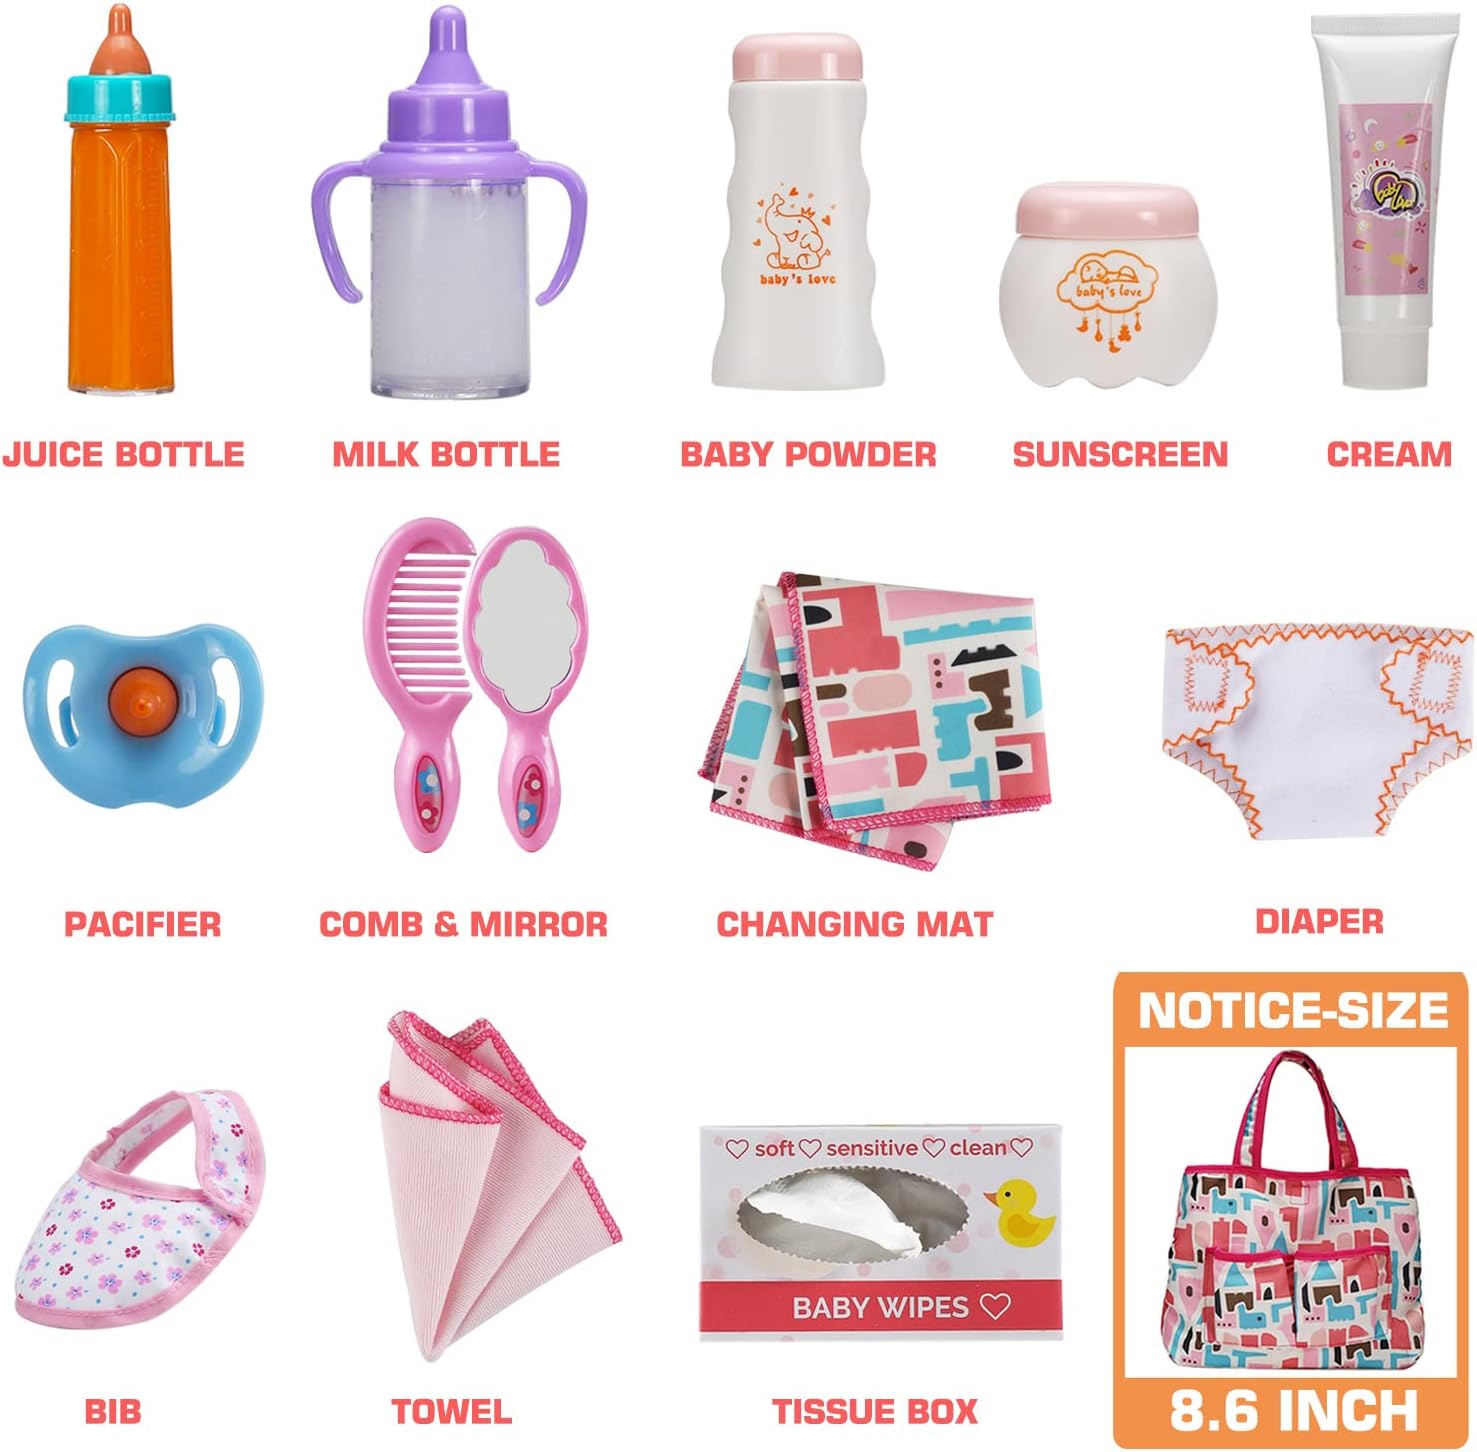 14 Pack Baby Doll Accessories, Baby Doll Feeding and Caring Set Includes Diaper Bag, Doll Diapers, Magic Bottle, Changing Mat for Girl Toddler Kid, Babies Pretend Play Set for Birthday Gift Christmas